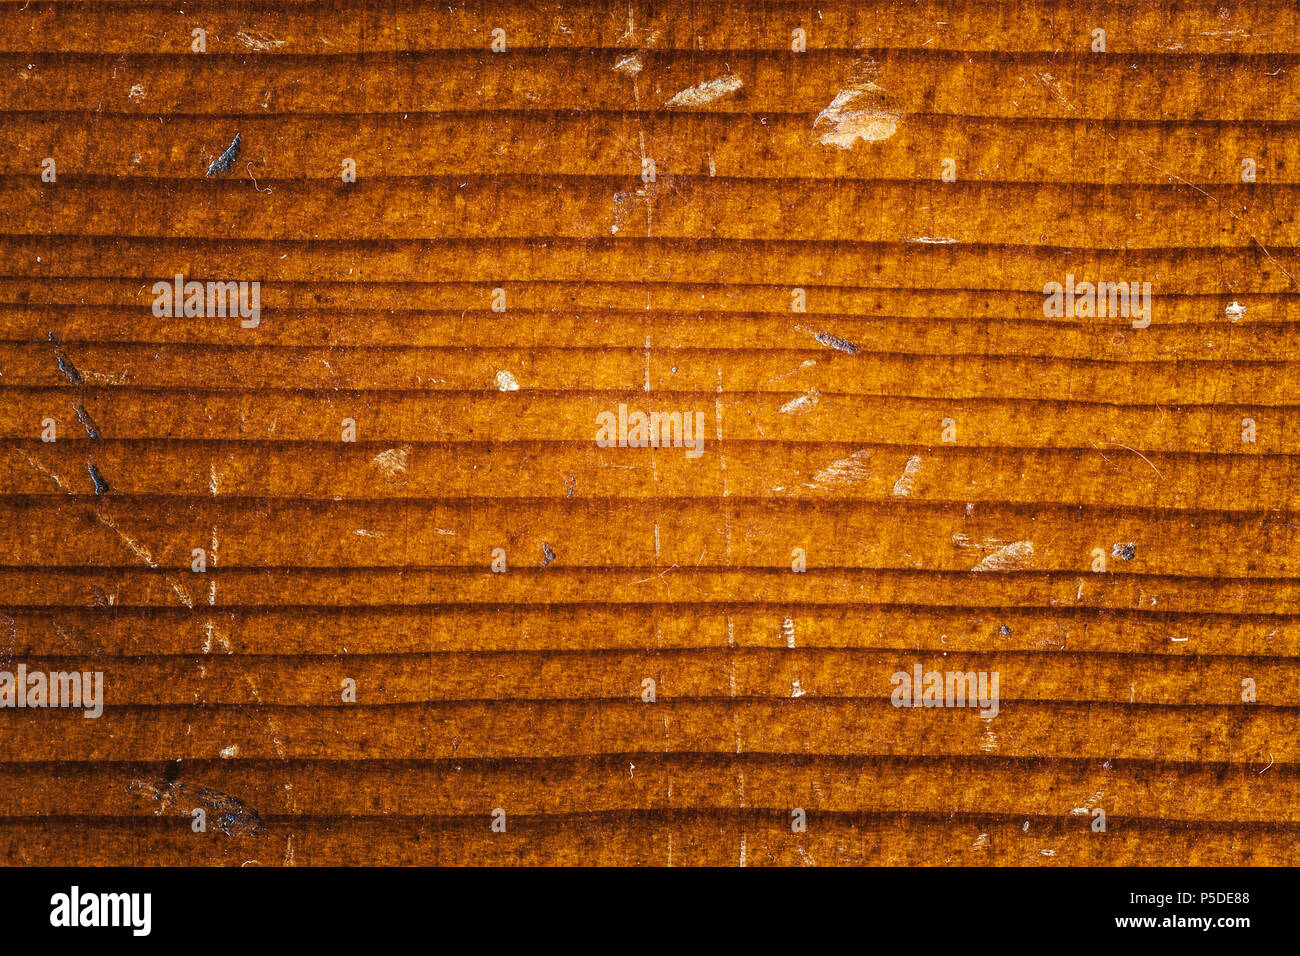 Texture of a wooden cello, old, dusty and scratched surface. Stock Photo